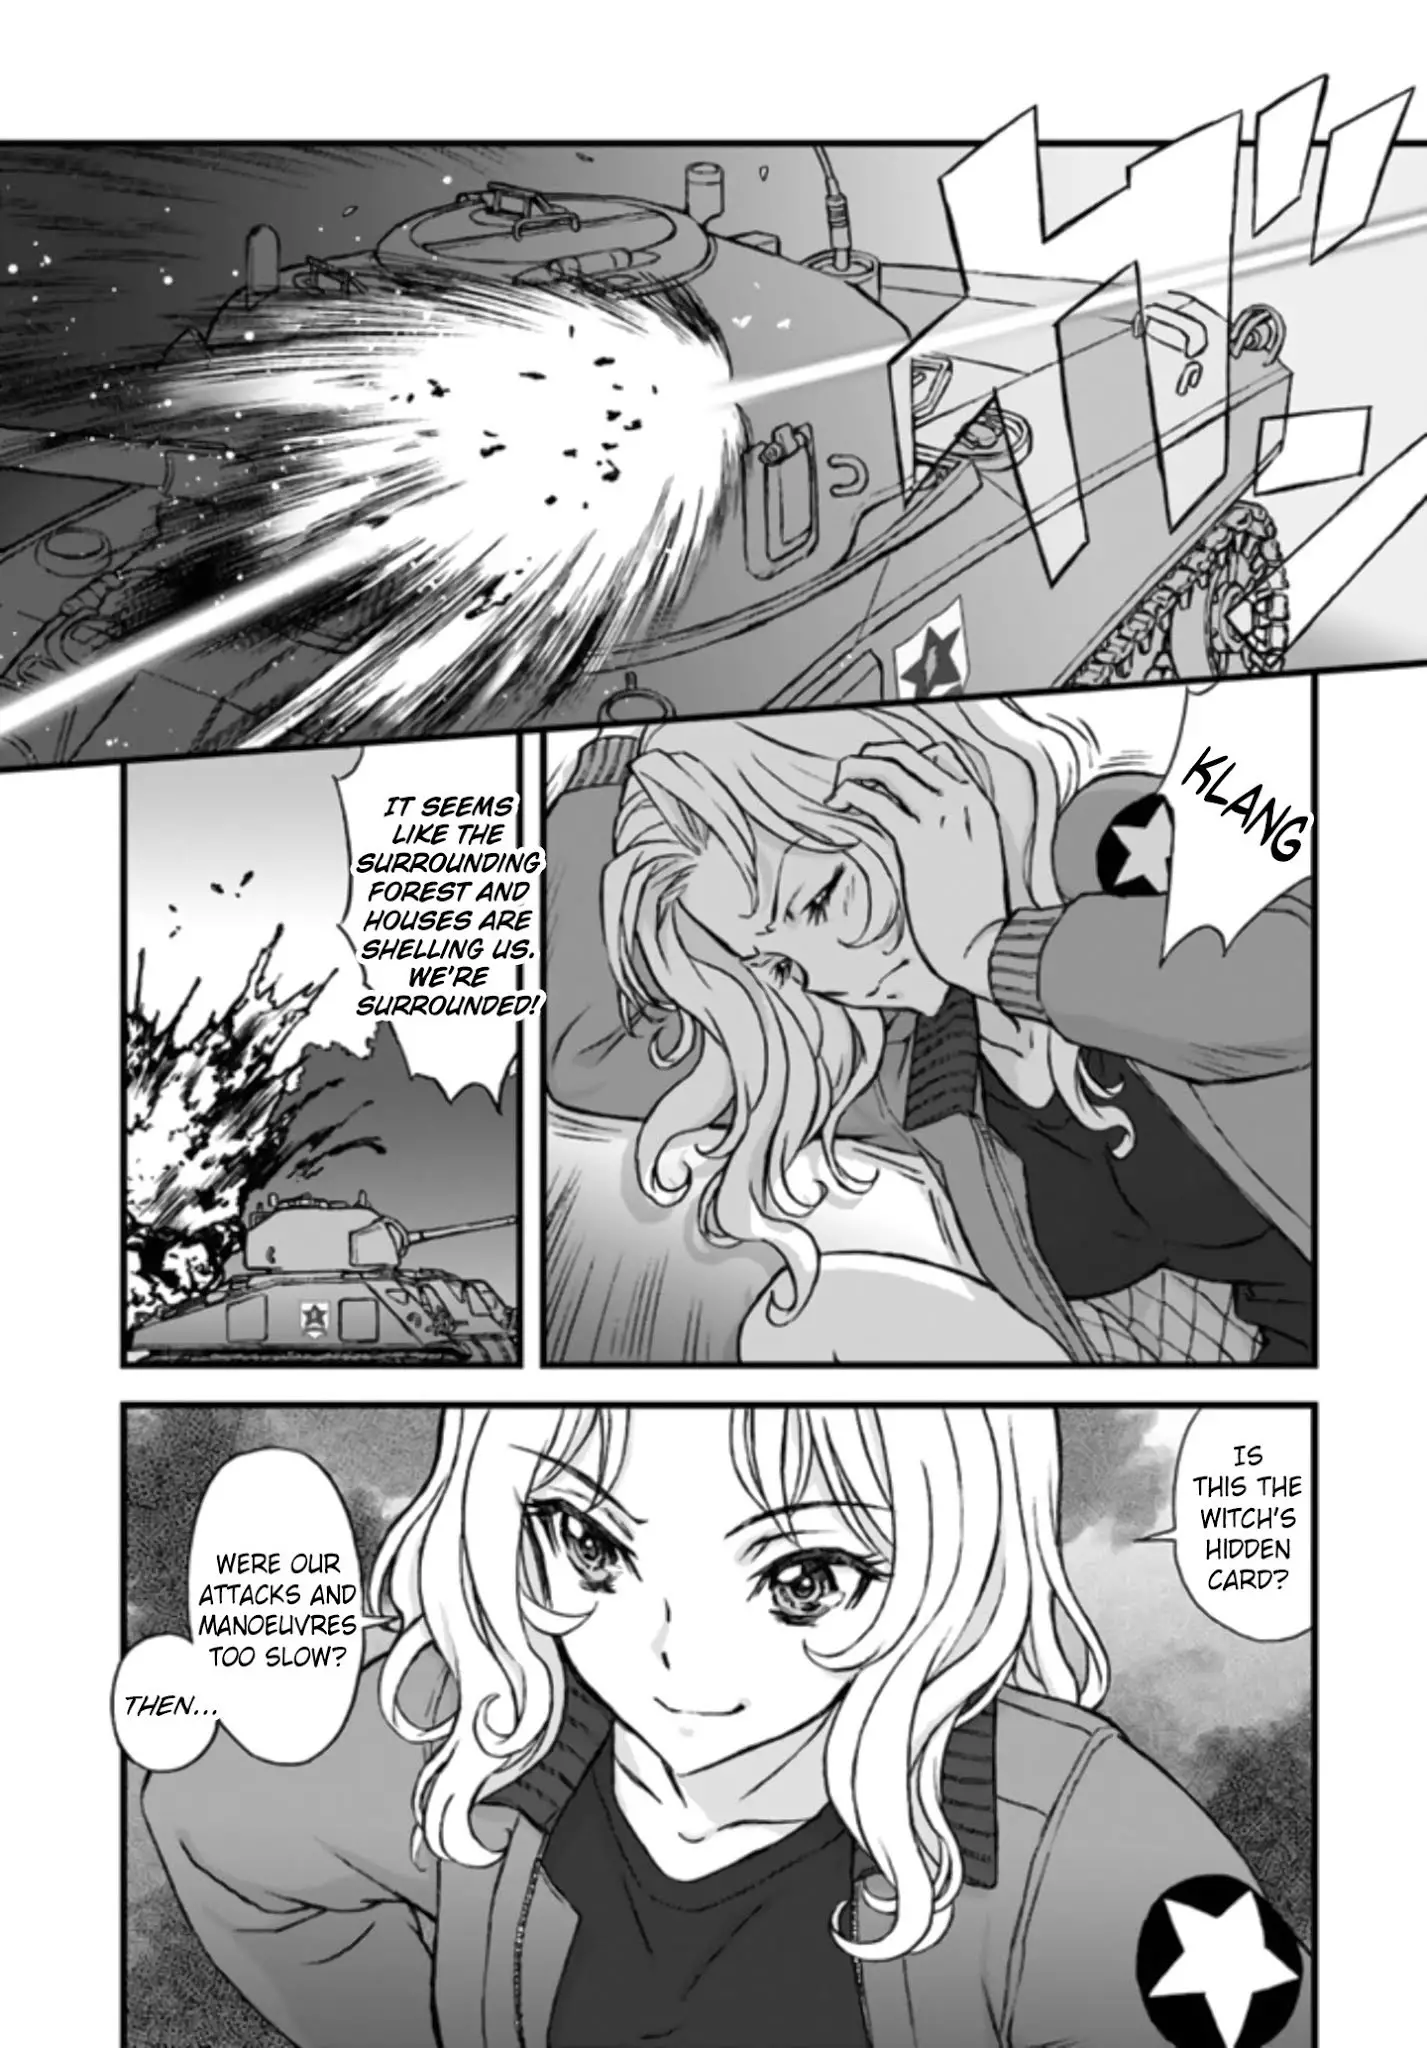 Girls Und Panzer - The Fir Tree And The Iron-Winged Witch - 4 page 11